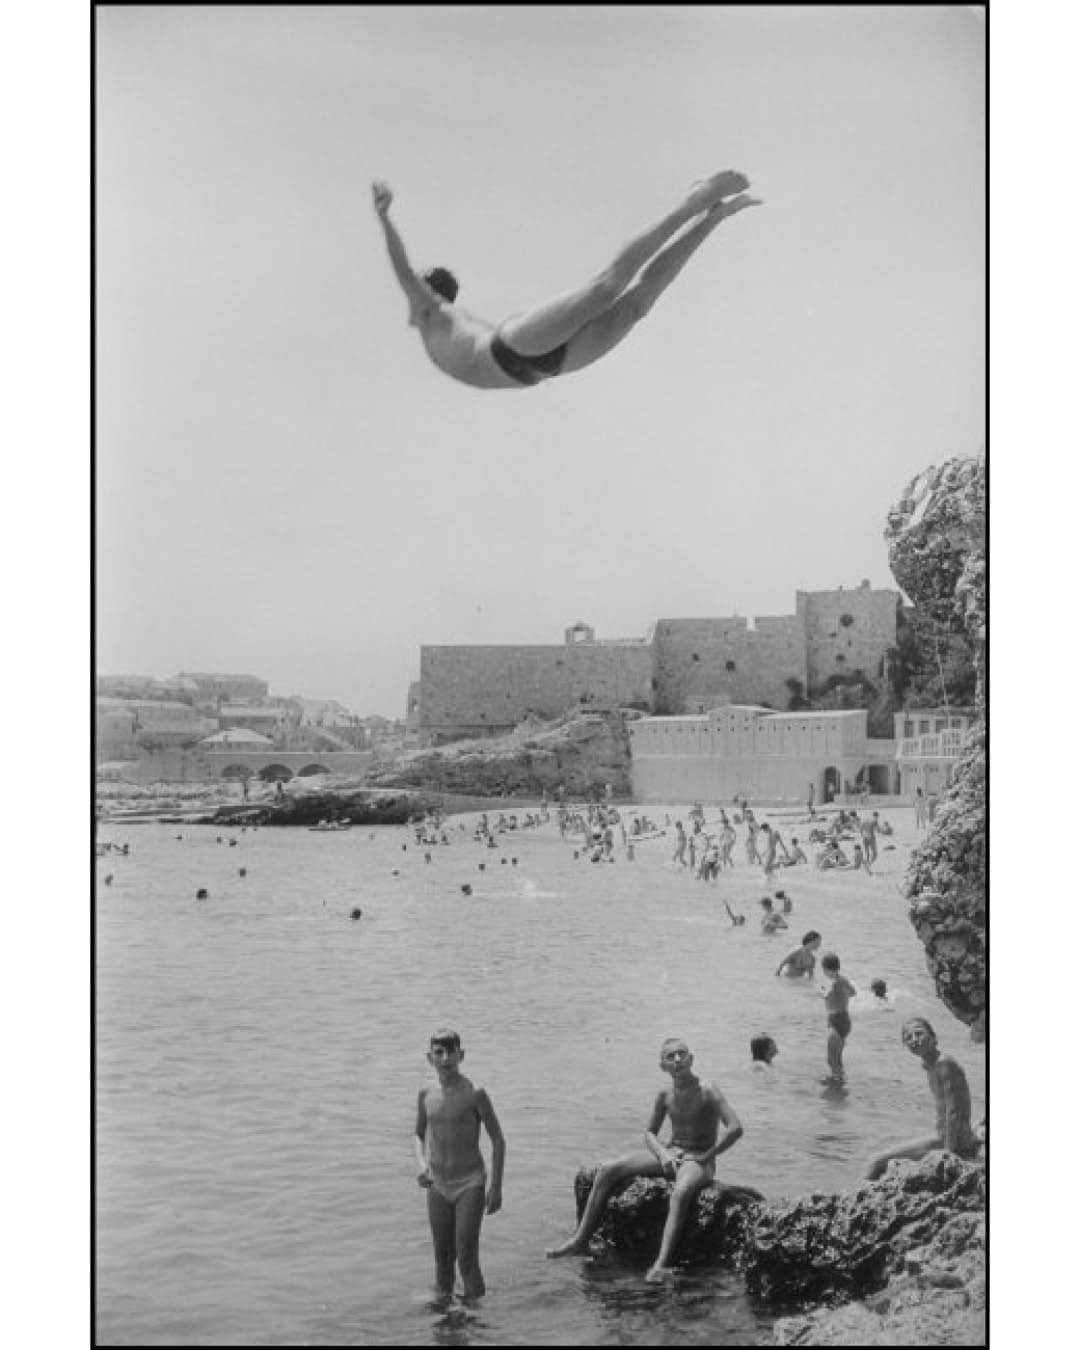 Magnum Photosさんのインスタグラム写真 - (Magnum PhotosInstagram)「A Bigger Splash ⁠ ⁠ Comment your favorite ❤️⁠ ⁠ PHOTOS (left to right): ⁠ ⁠ (1) Sicily. Italy. 1982. © @ferdinandosciannaofficial / Magnum Photos⁠ ⁠ (2) Champion diver Lynn Morrison. 1954. © @philippe_halsman_official / Magnum Photos⁠ ⁠ (3) Estoril. Portugal. 1994. © @marktpower / Magnum Photos⁠ ⁠ (4) An Iraqi translator jumping into the pool. US troops based in front of Uday Hussein's Palace. Baghdad. Iraq. July 2003. © Thomas Dworzak / Magnum Photos⁠ ⁠ (5) Salt City. Arizona. USA. 1980. © @davidhurnphoto / Magnum Photos⁠ ⁠ (6) Tyrrhenian Sea. Italy. 1961. © @burtglinnphoto / Magnum Photos⁠ ⁠ (7) Divers Davd Boudia and Thomas Finchum. Fort Lauderdale. USA. 2008. © @paolopellegrin / Magnum Photos⁠ ⁠ (8) Abdulahman, 14 years old, is having fun with his friends near the banks of the Euphrates River by diving into it. Raqqa. Syria. May 2021. © @william.keo / Magnum Photos⁠ ⁠ (9) Yugoslavia. © Marc Riboud / Fonds Marc Riboud au MNAAG / Magnum Photos⁠ ⁠ (10) Spring Break. Daytona Beach. Florida. USA. 1988. © Alex Webb (@webb_norriswebb) / Magnum Photos」7月8日 0時01分 - magnumphotos